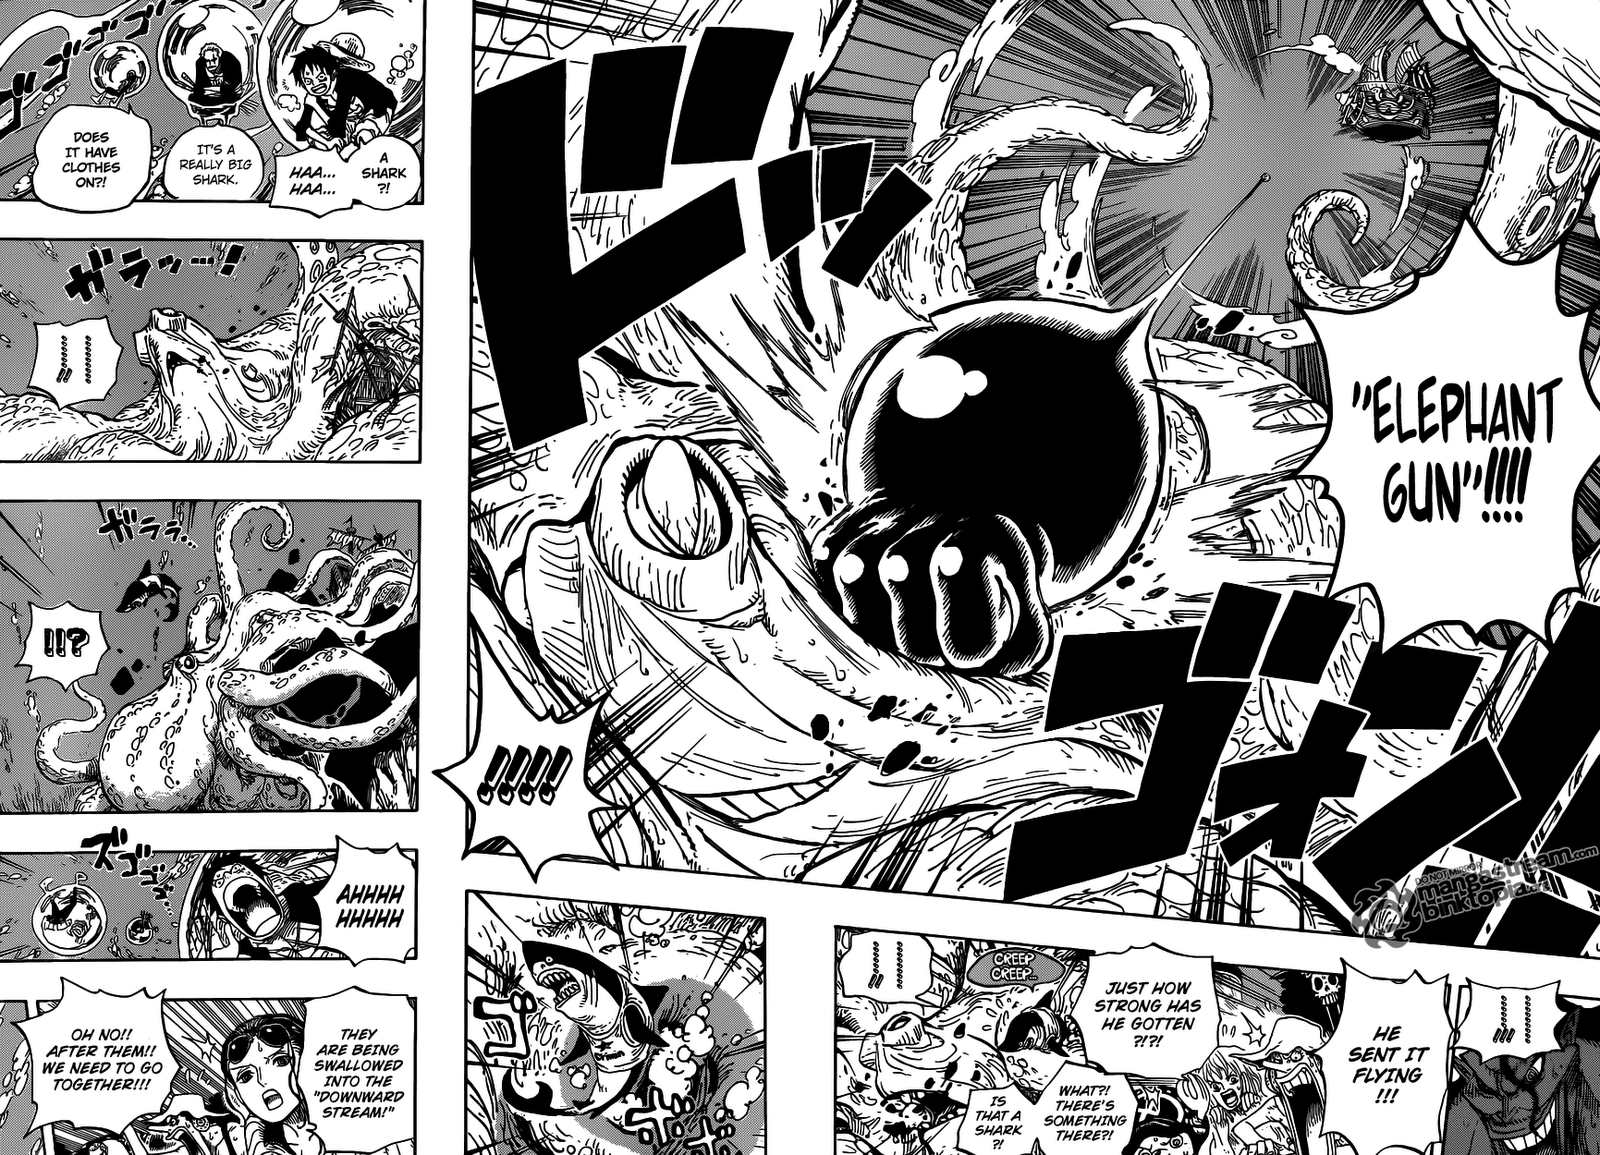 Read One Piece 605 Online | 13 - Press F5 to reload this image